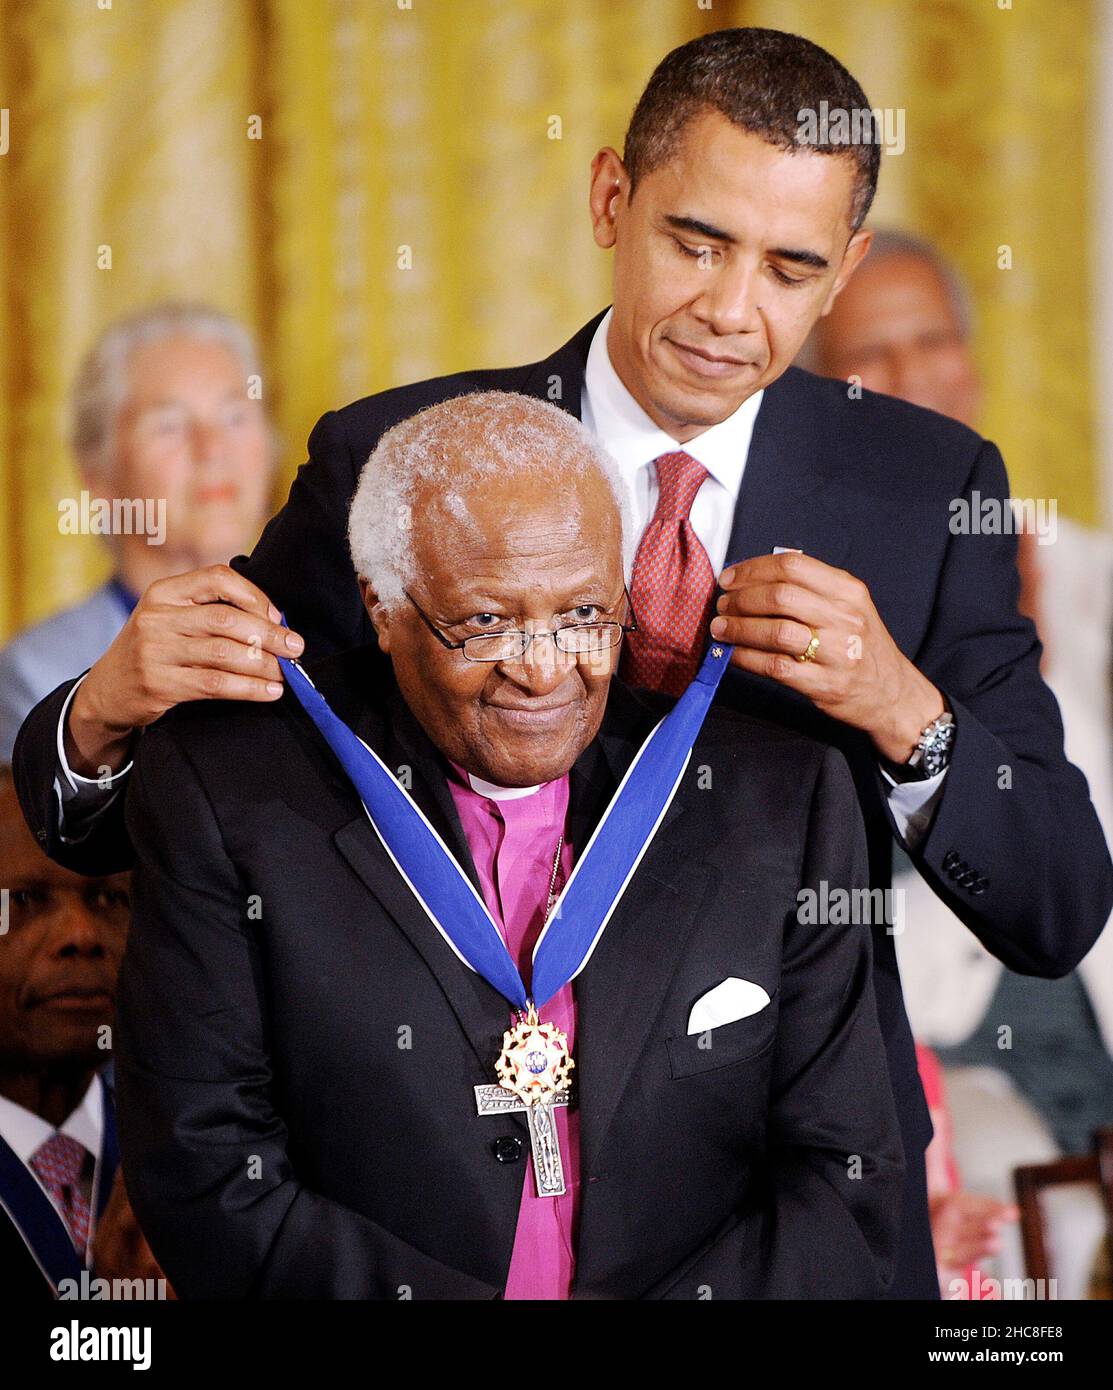 Washington, USA. 12th Aug, 2009. President Barack Obama awards the Presidential Medal of Freedom to Archbishop Emeritus Desmond Mpilo Tutu during a ceremony at the White House in Washington, DC, on Wednesday, August 12, 2009. (Photo by Olivier Douliery/Abaca Press/MCT/Sipa USA) Credit: Sipa USA/Alamy Live News Stock Photo